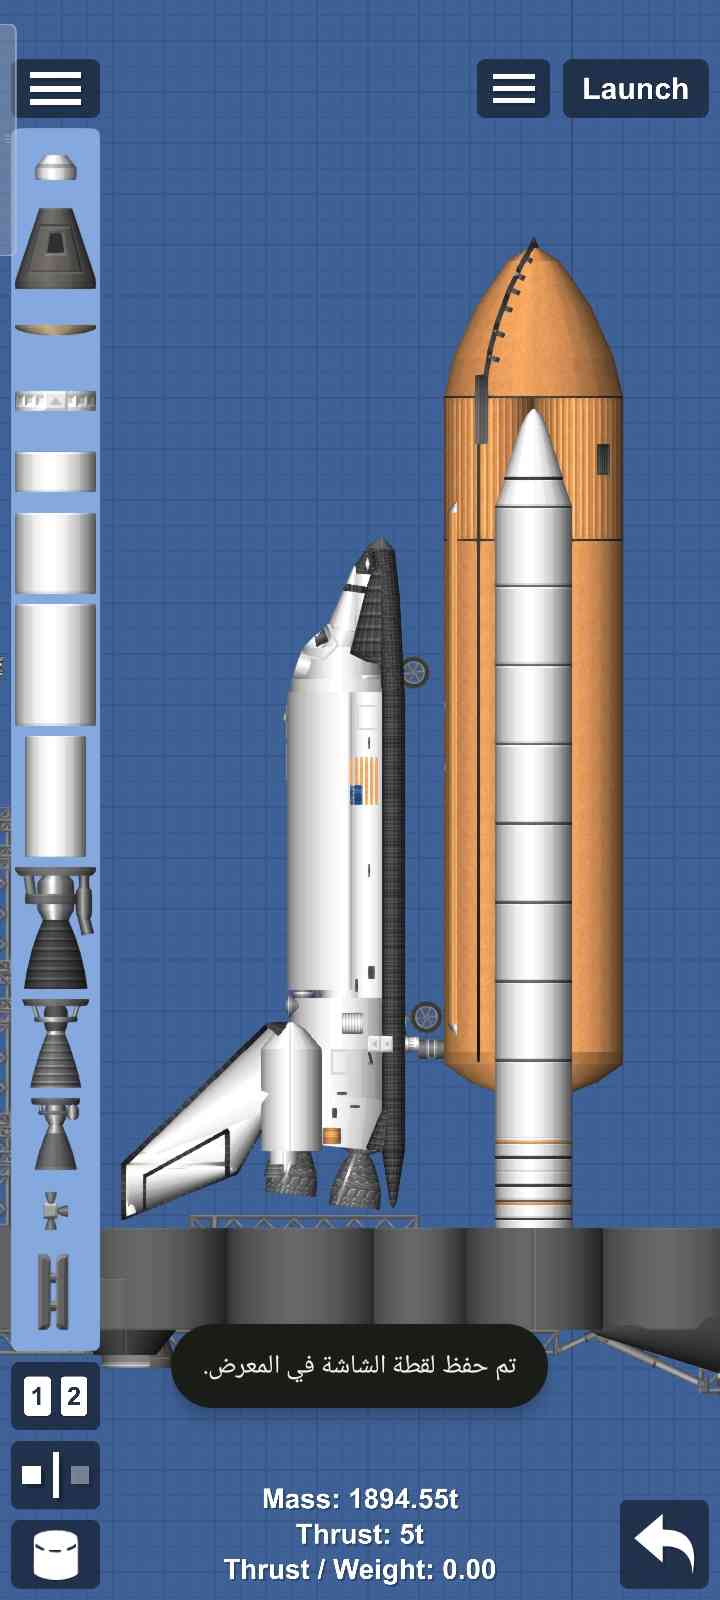 Shuttle space with nasa launch Blueprint for Spaceflight Simulator ...